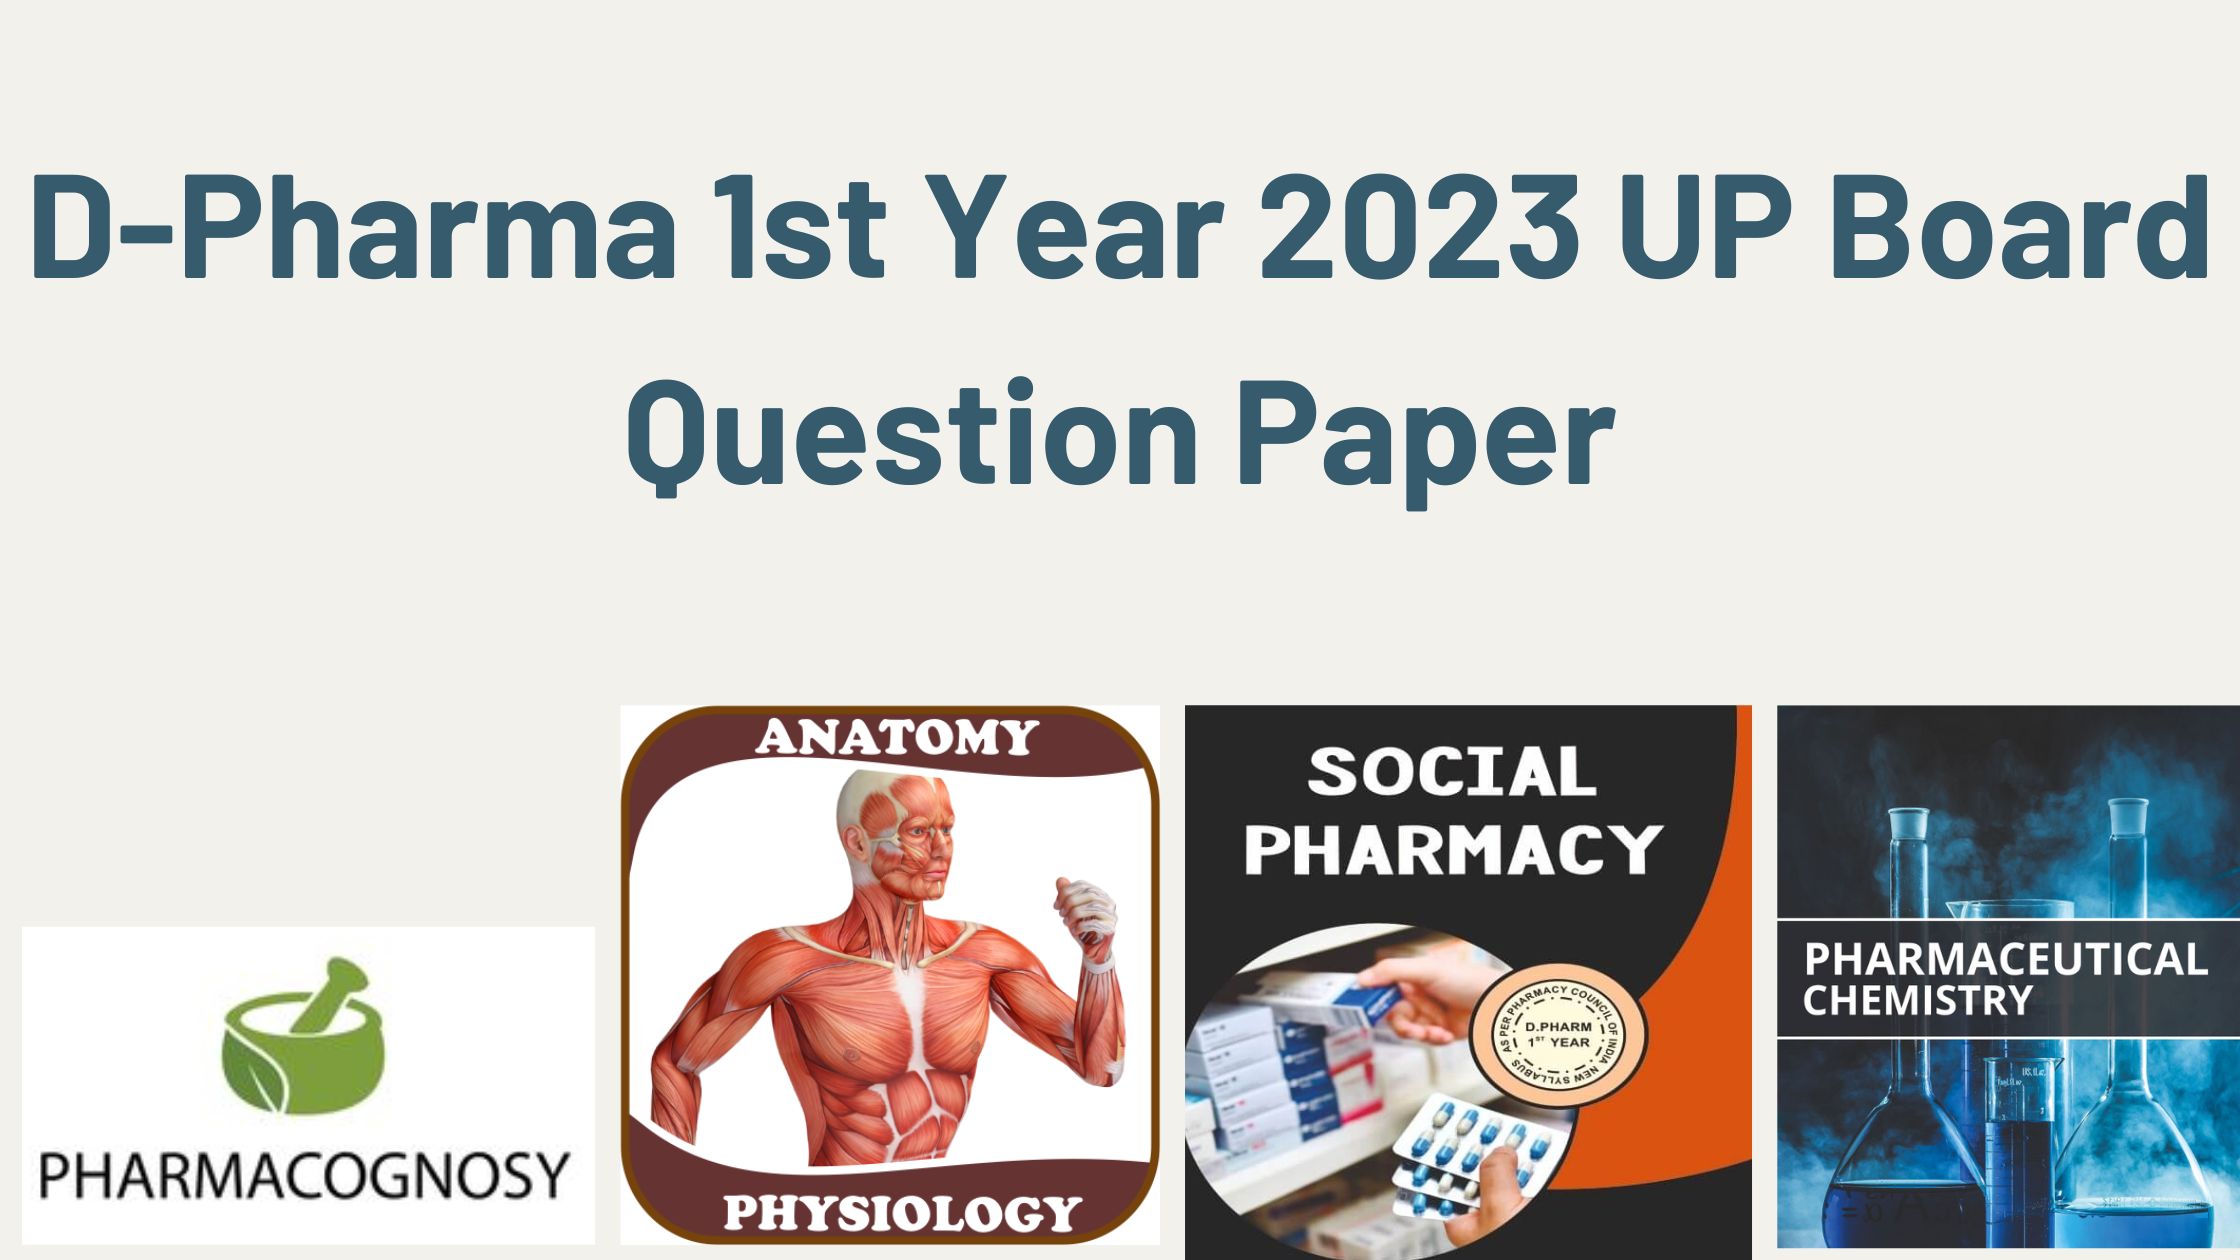 D-Pharma 1st Year 2023 Board Question Paper